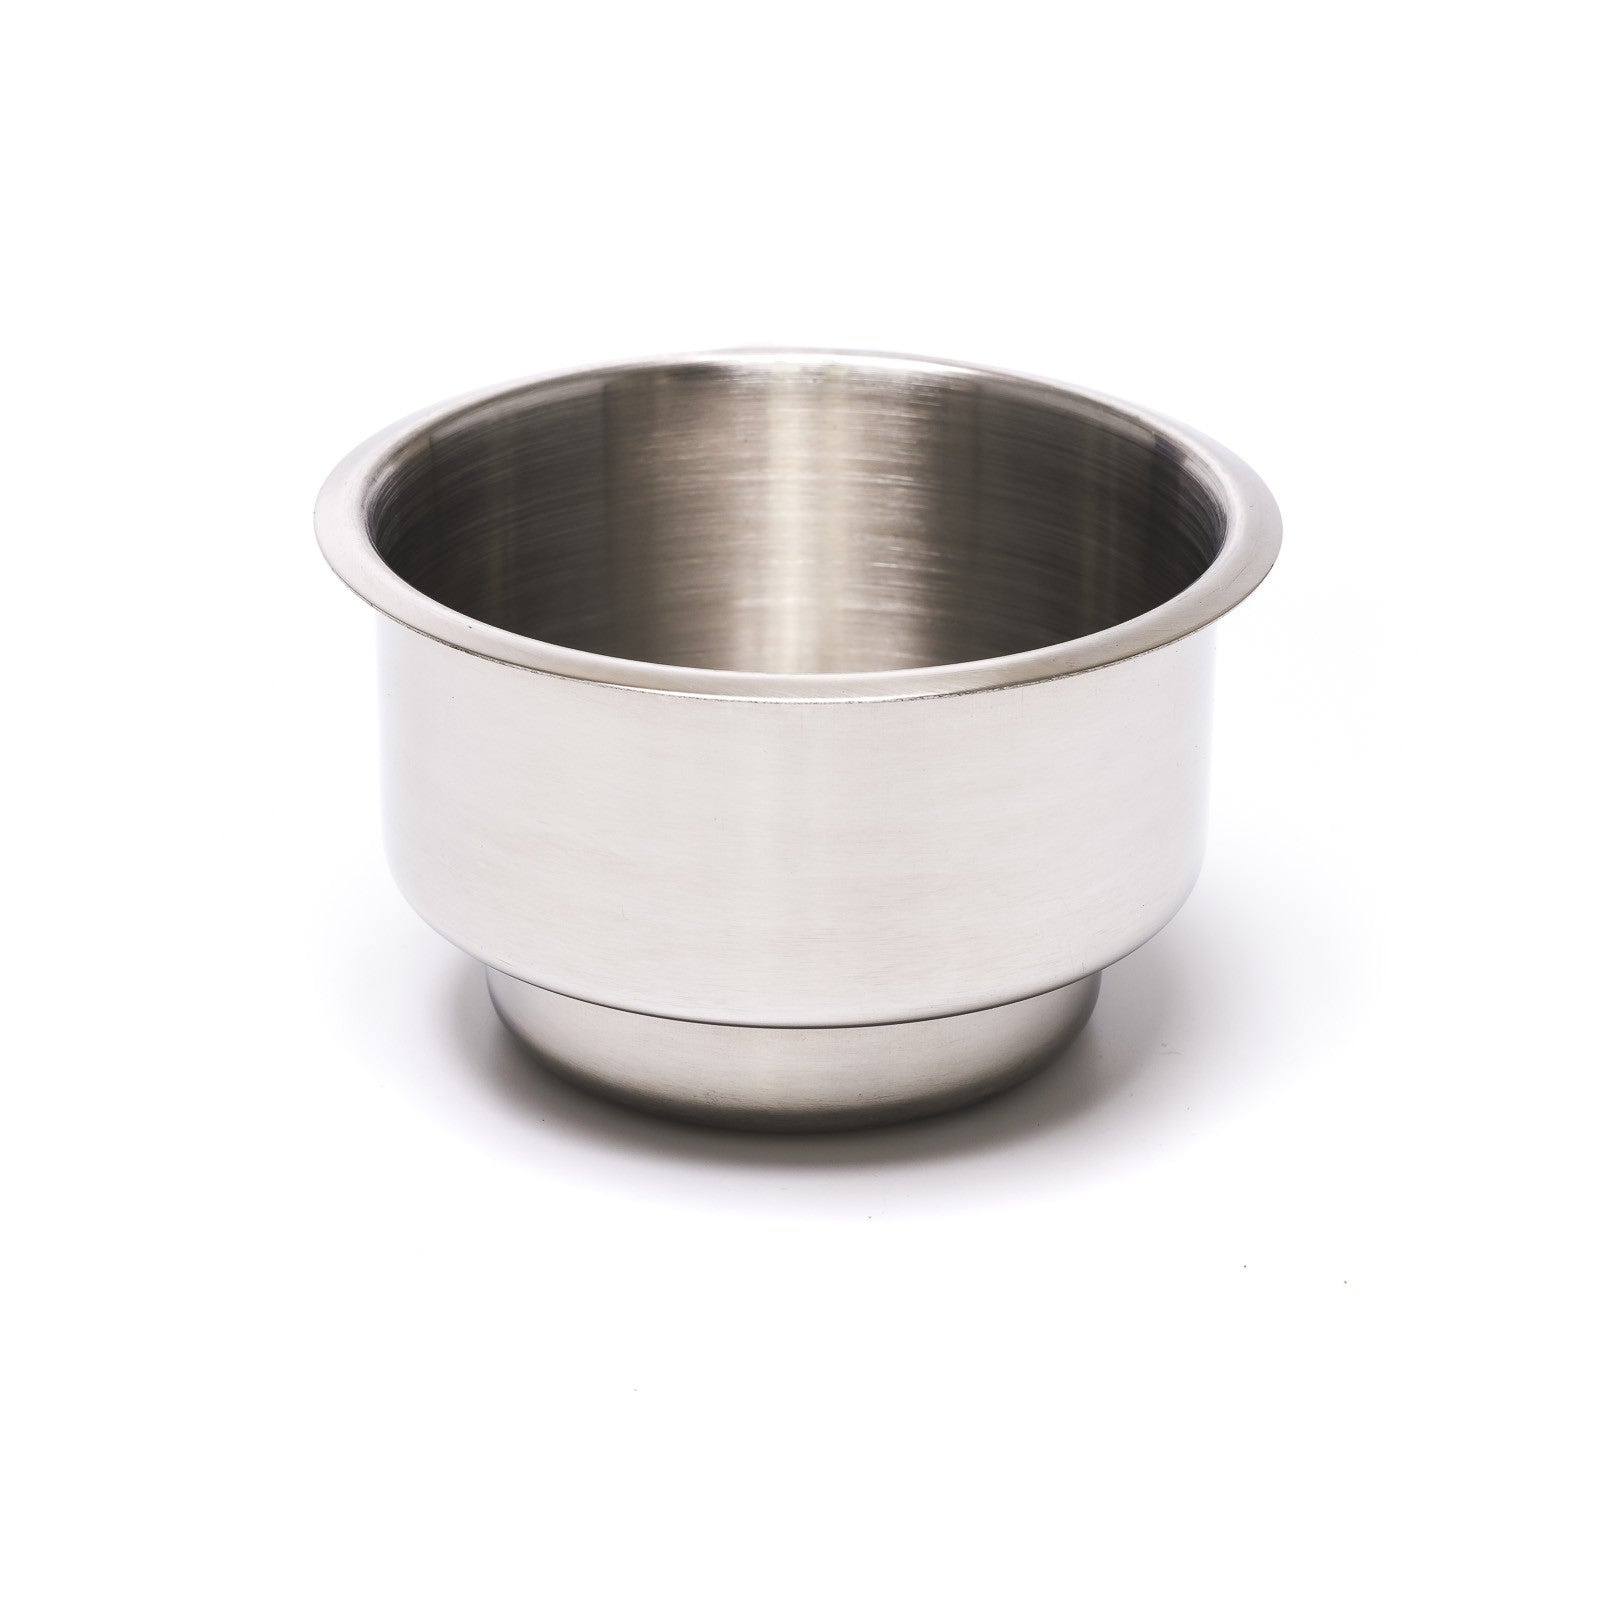 Stainless Steel Dual Size Drop In Drink Holder